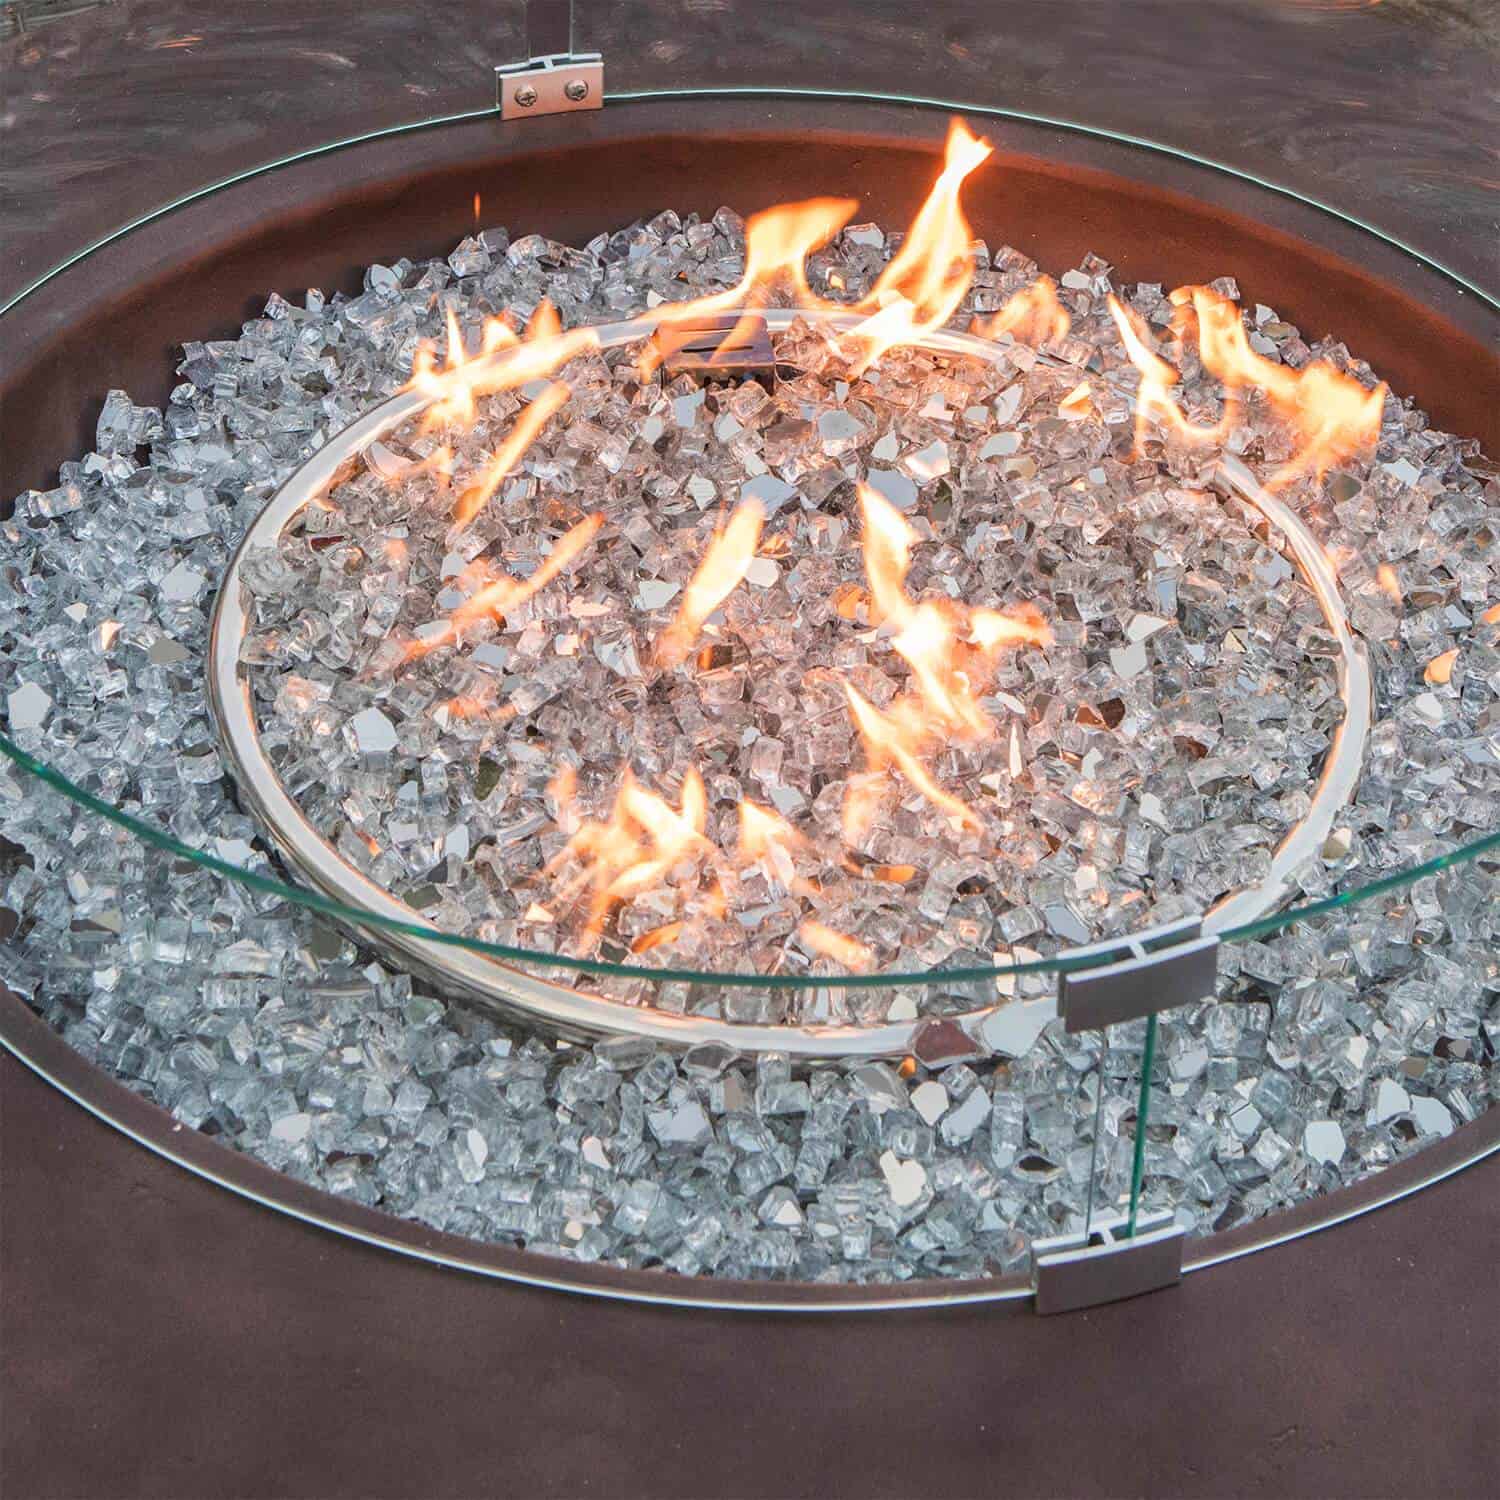 Johnston 8 Piece U Shaped Outdoor Couch with Round Fire Pit